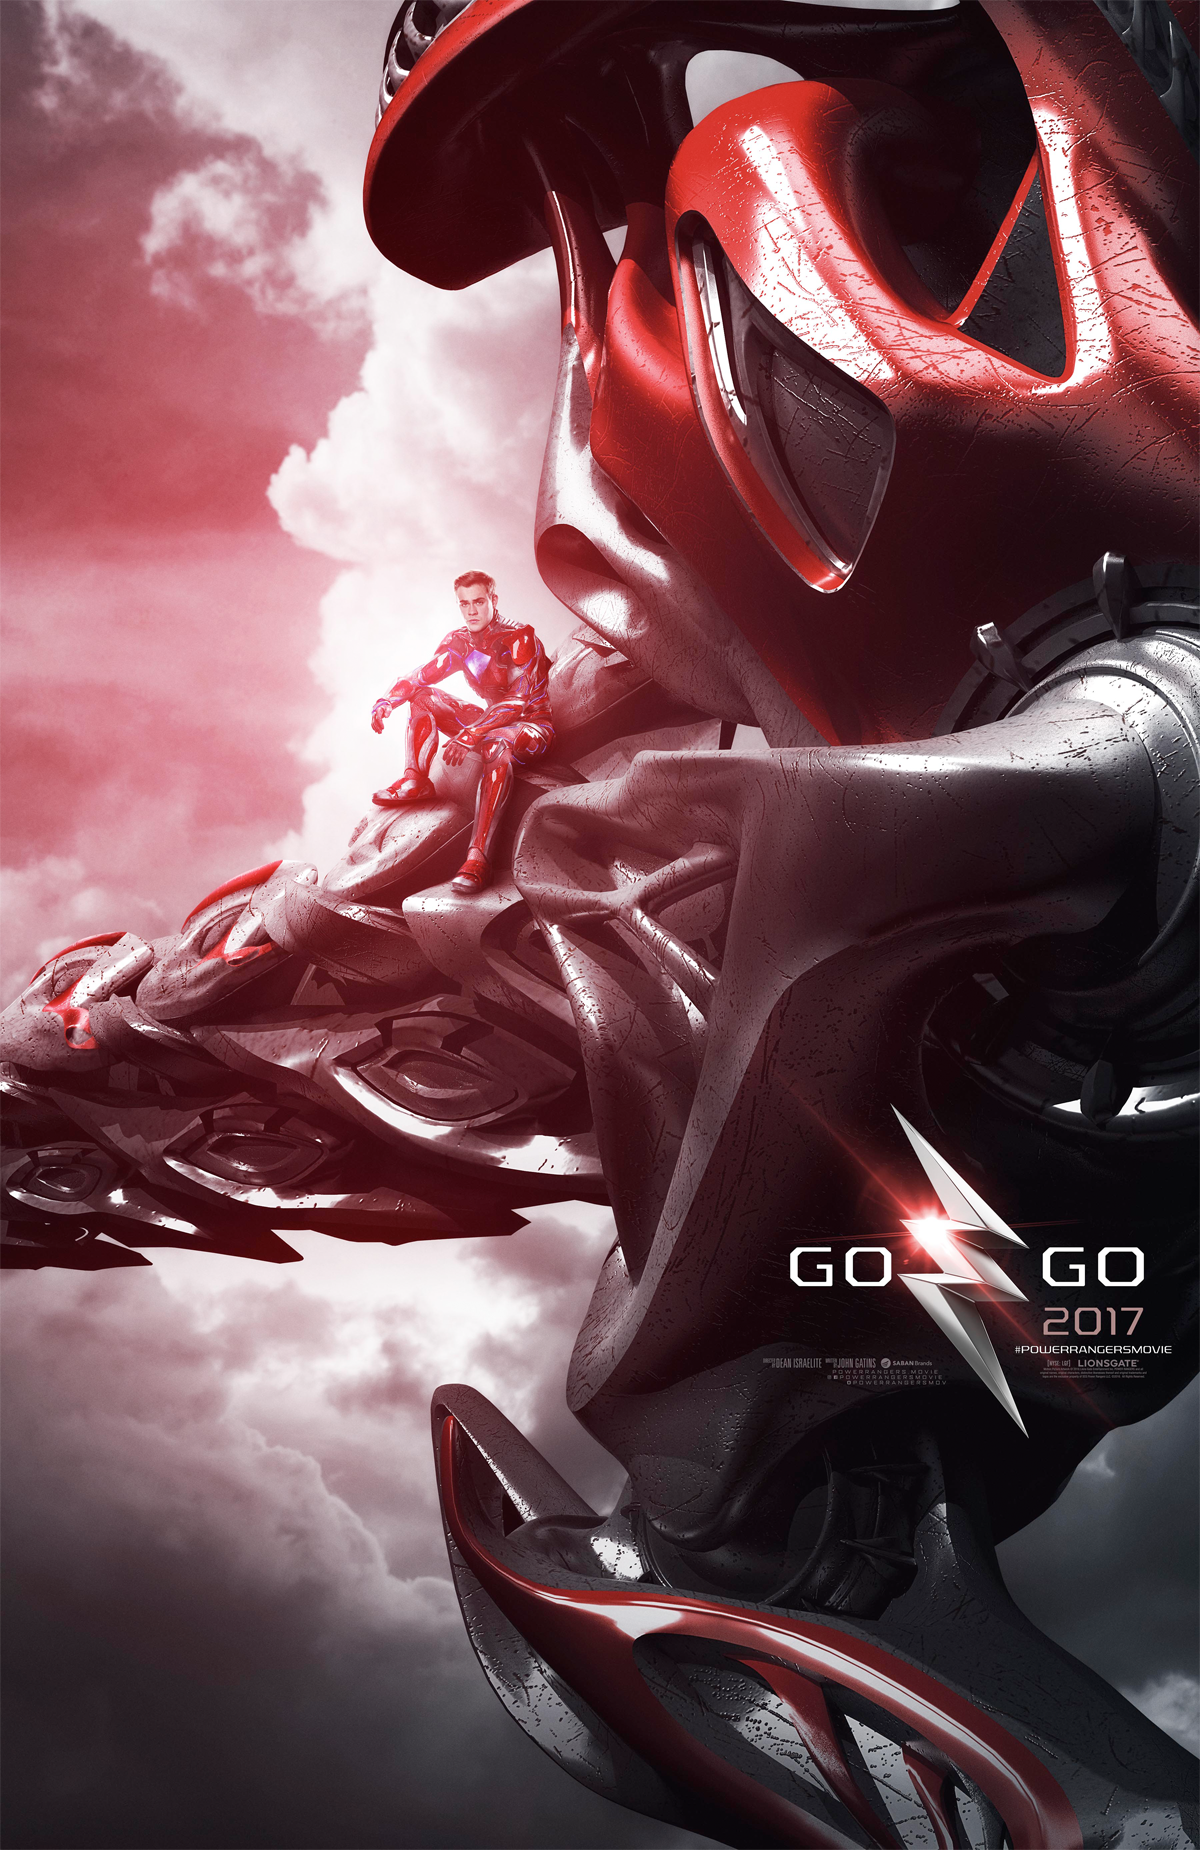 New Power Rangers Movie Posters Give A Teasing First Look At The Zords